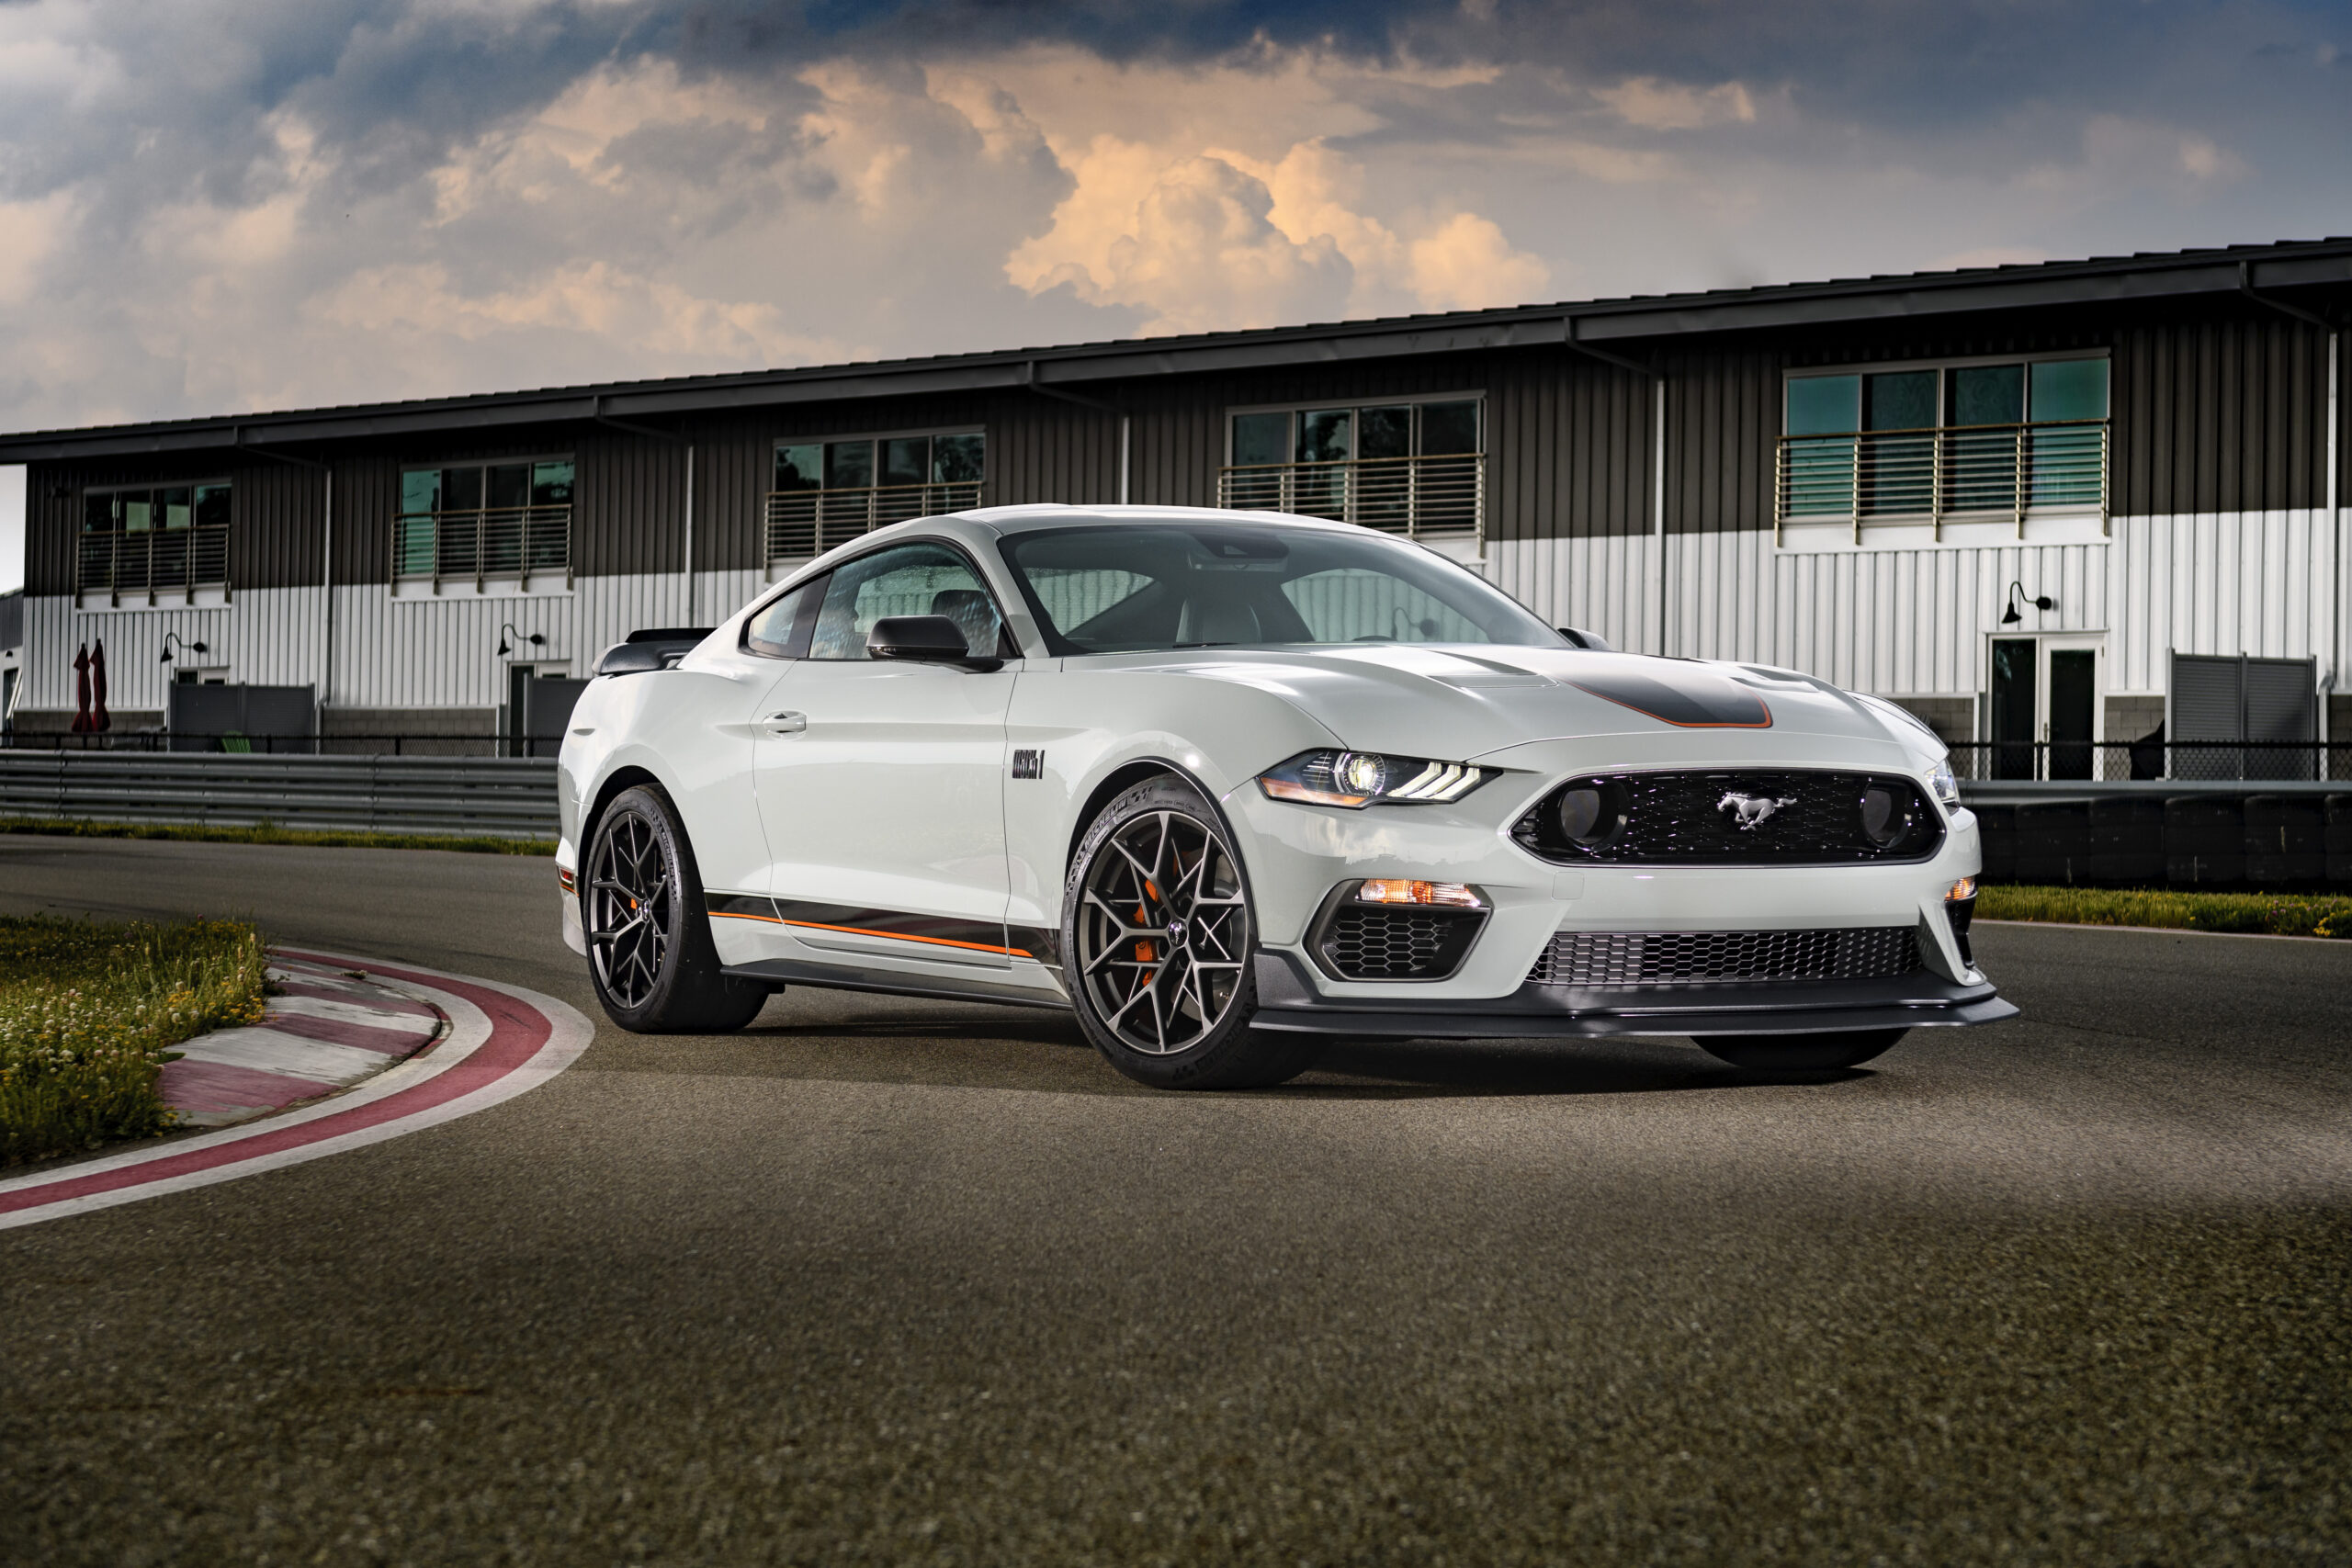 Ford Mustang Production Hampered by Semiconductor Chip Shortage